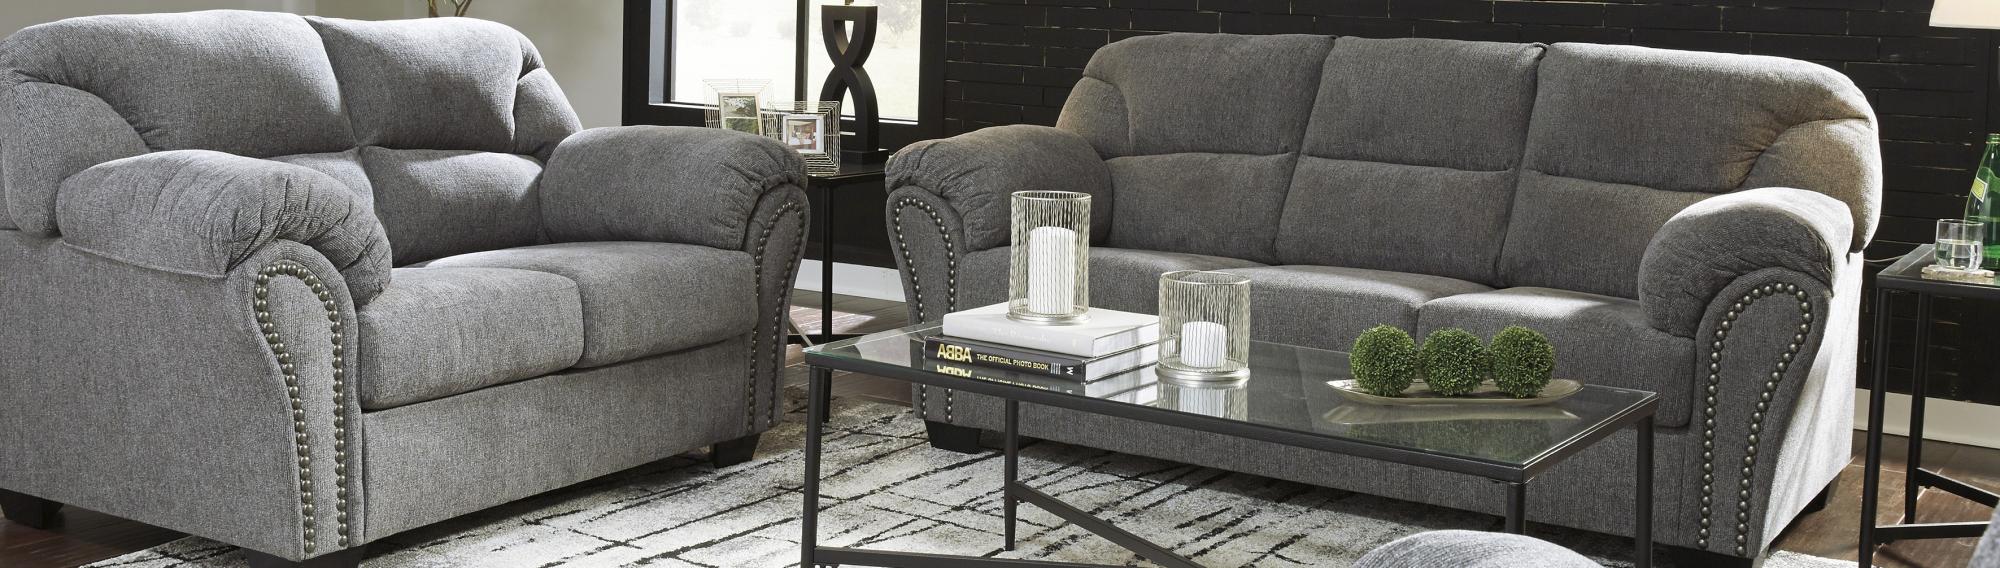 Header image of a Allmax Pewter Sofa & Loveseat from Superior Rent to Own